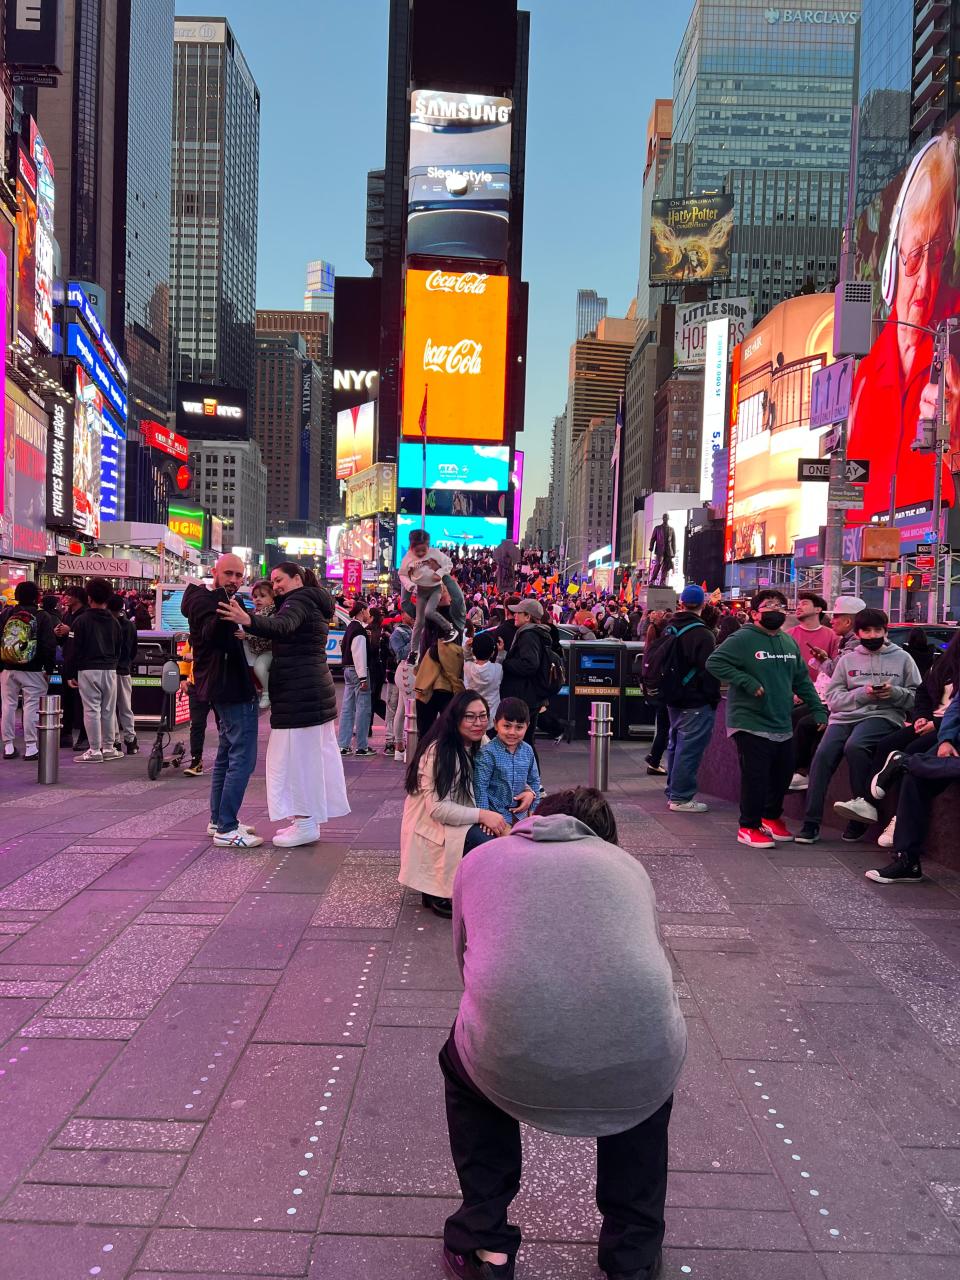 People taking photos in Times Square New York City disappointing photos